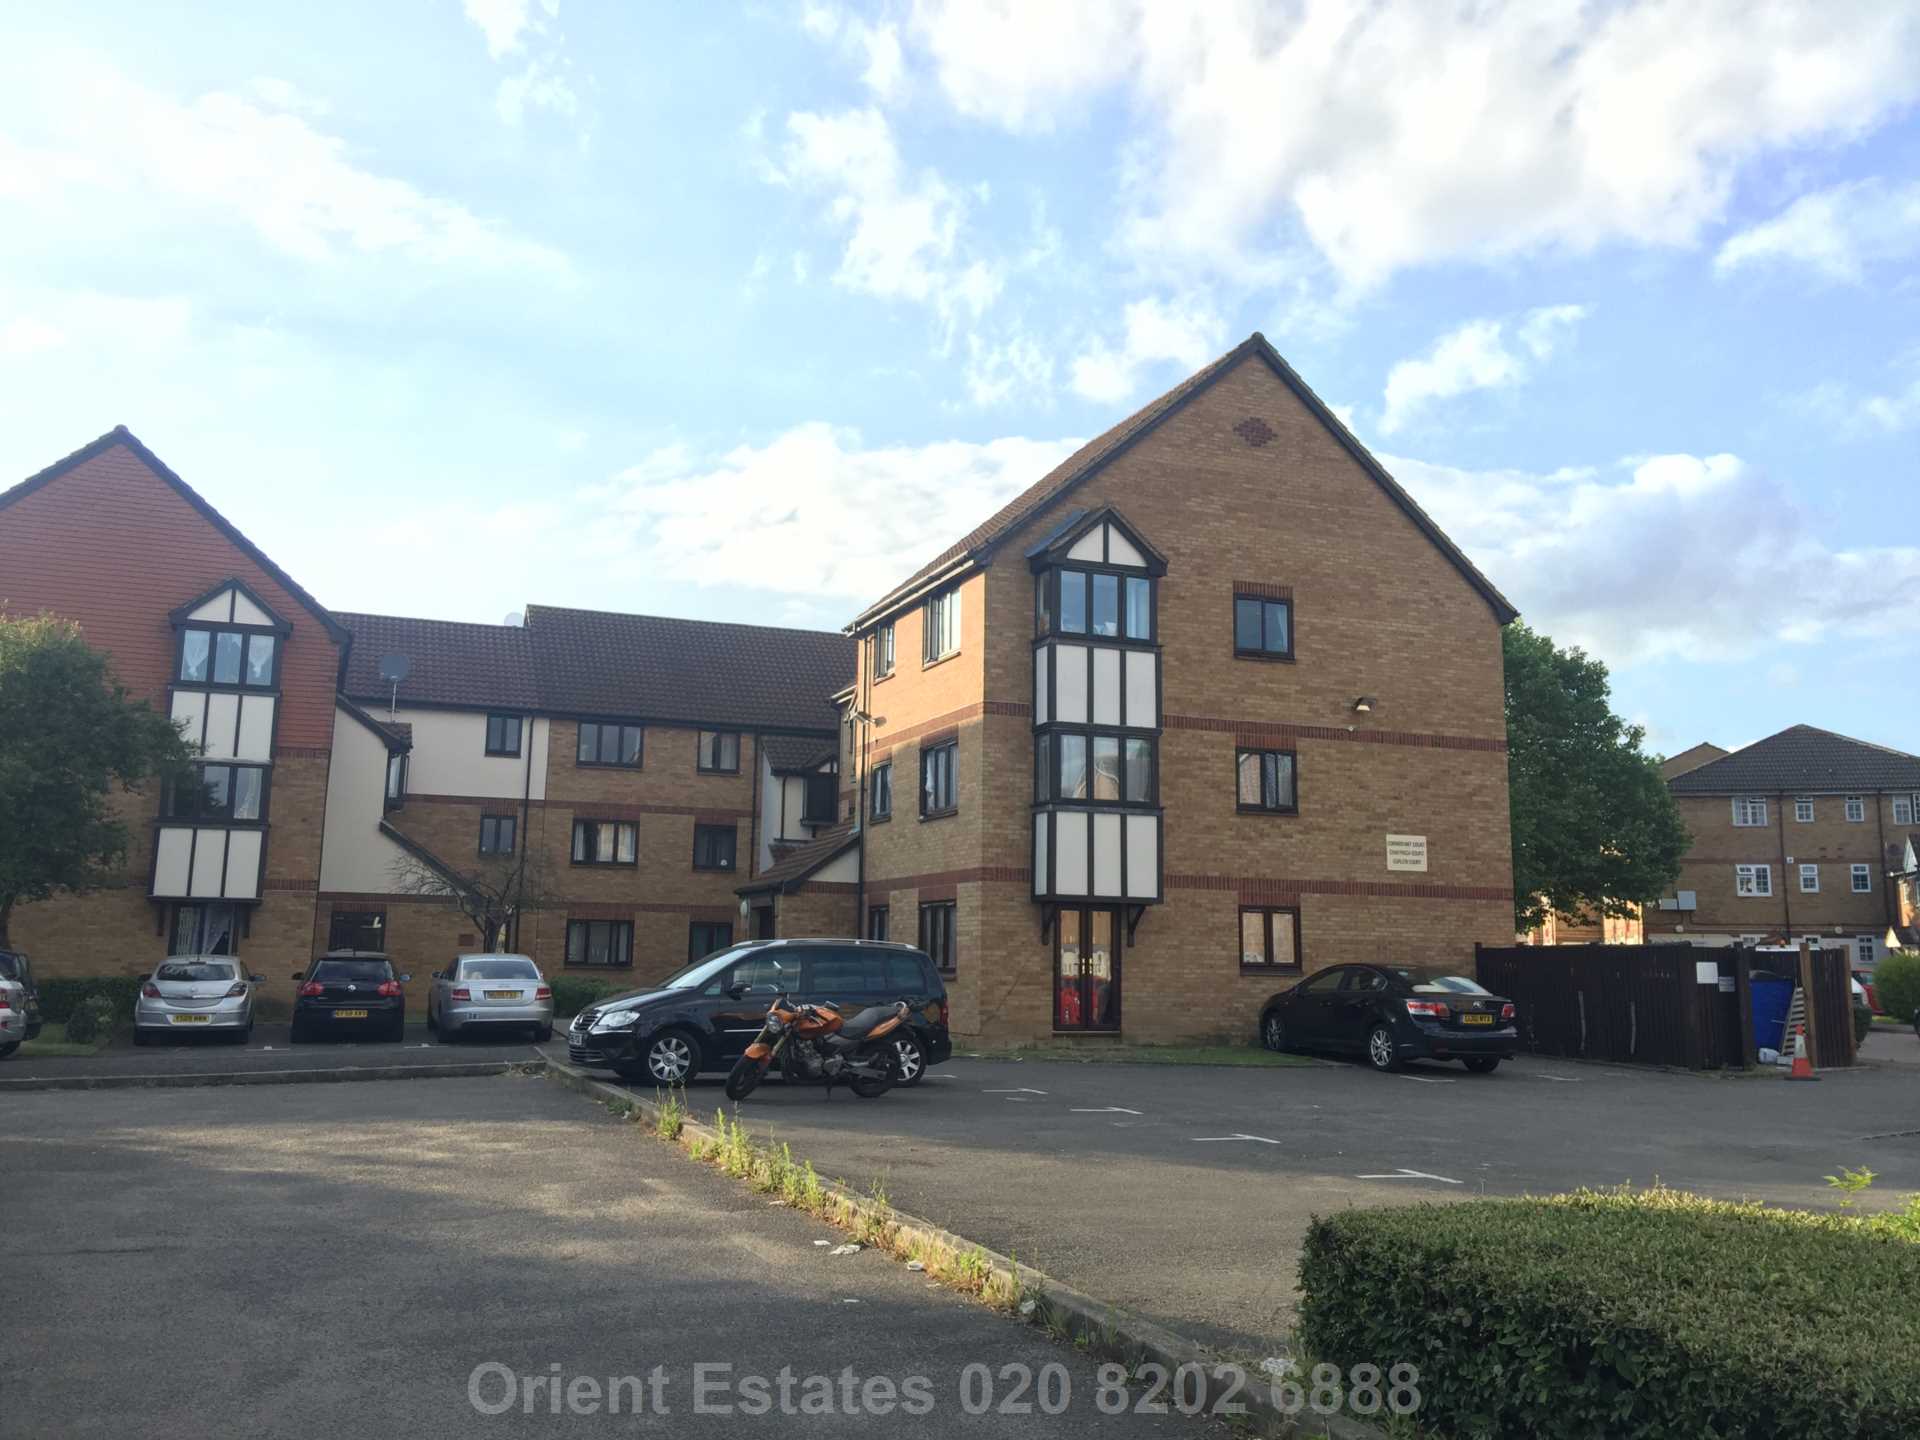 Curlew Court, Magpie Close, Colindale, Image 1